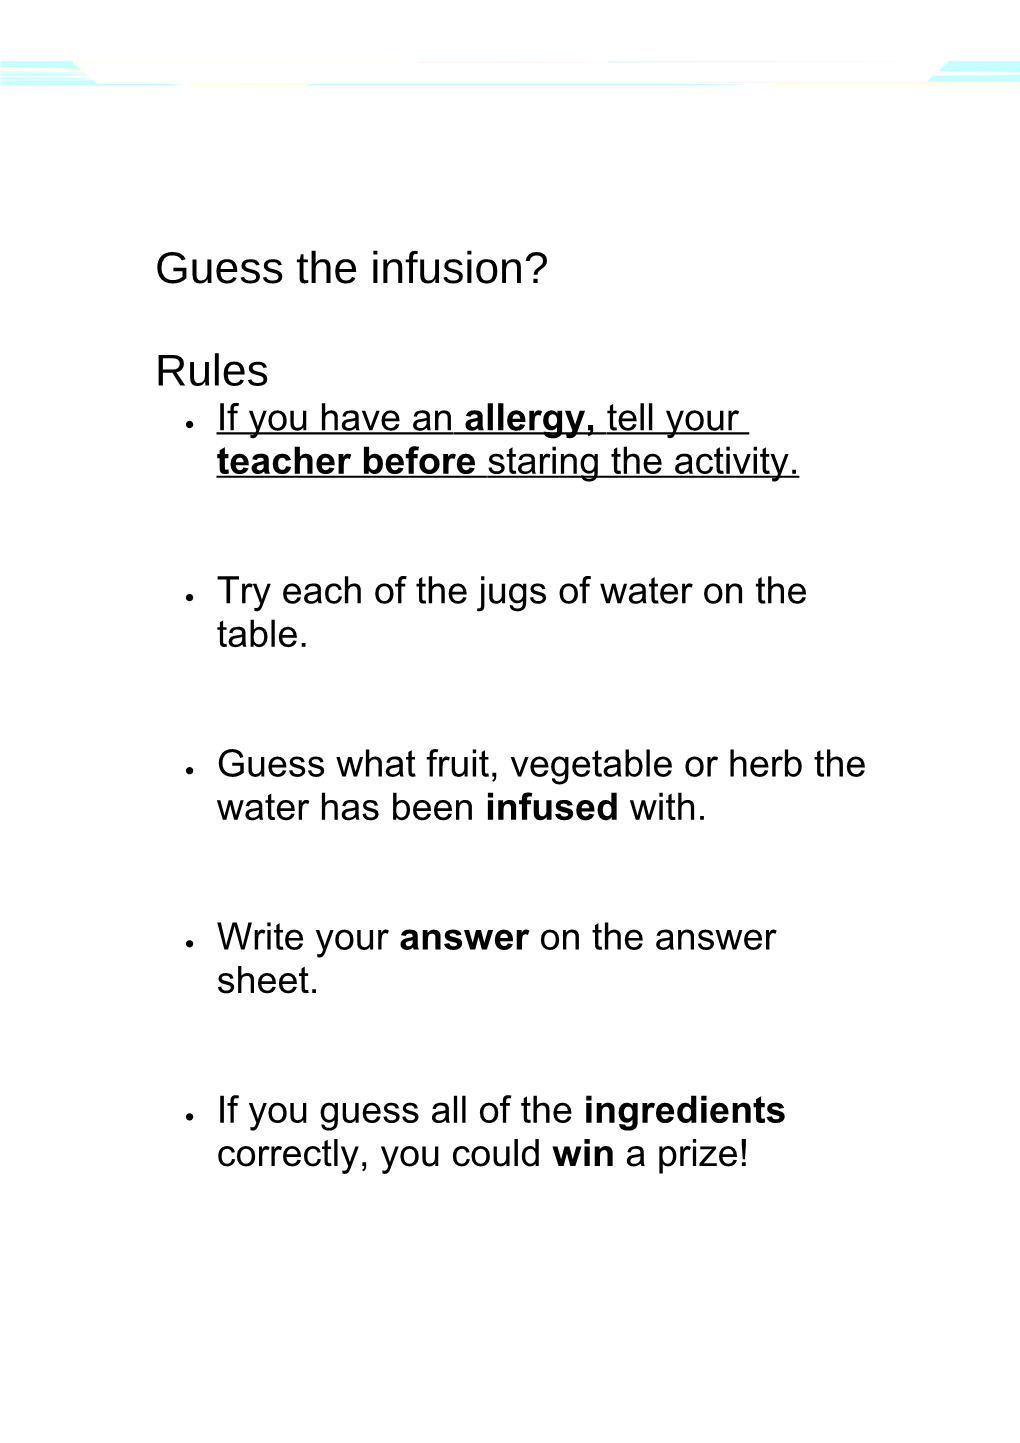 Guess the Infusion Teachers Notes